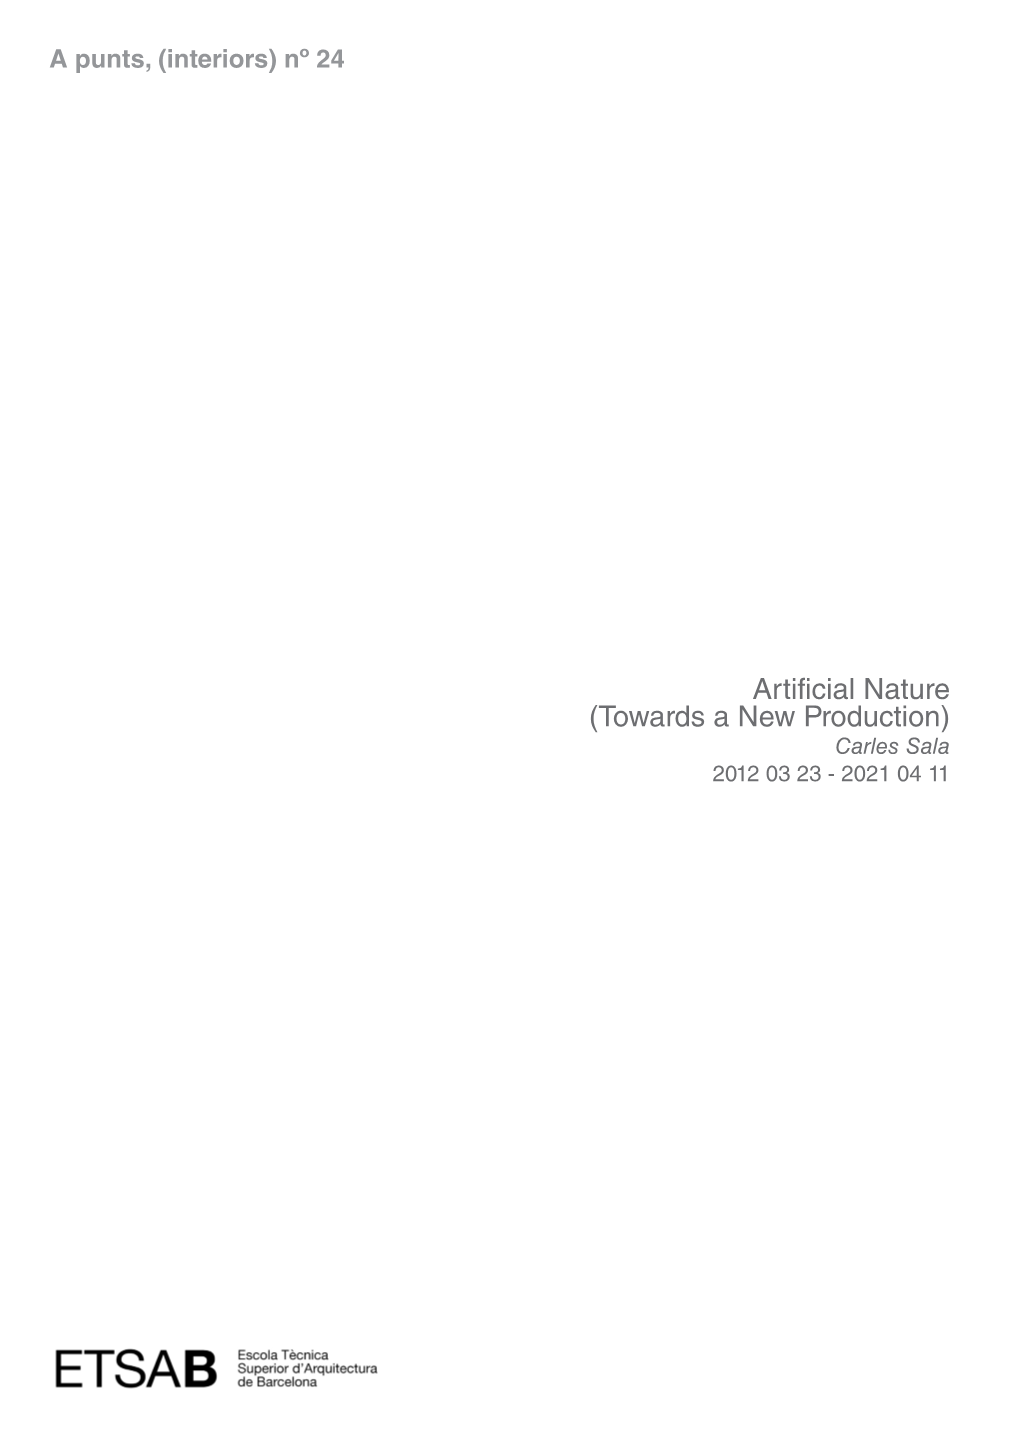 Artificial Nature (Towards a New Production) Carles Sala 2012 03 23 - 2021 04 11 Refs